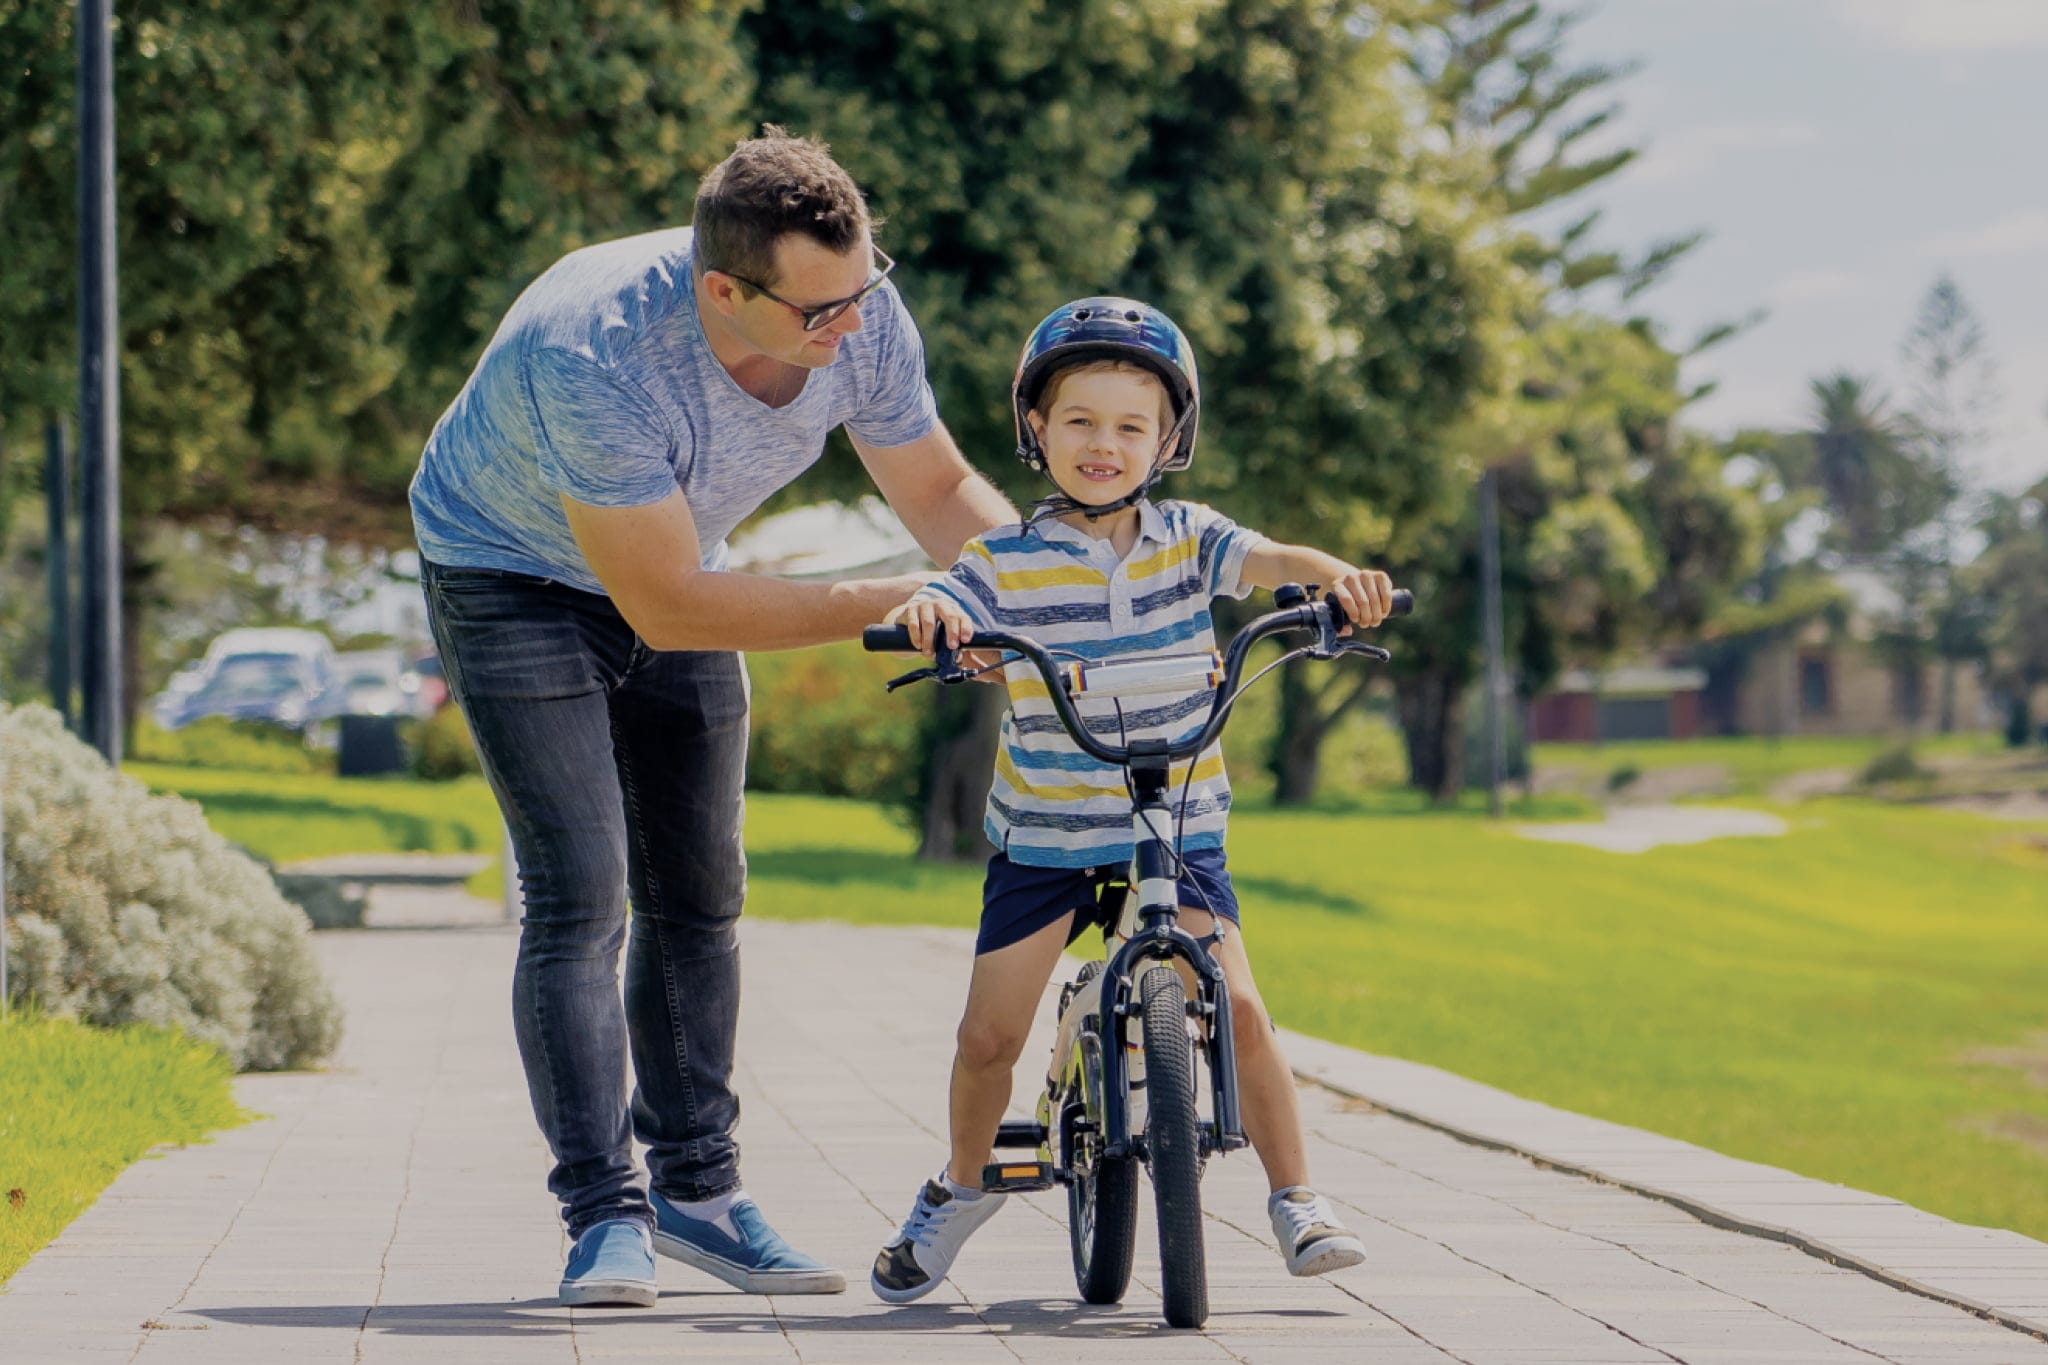 A young boy riding a bicycle in a local park with his dad supporting him